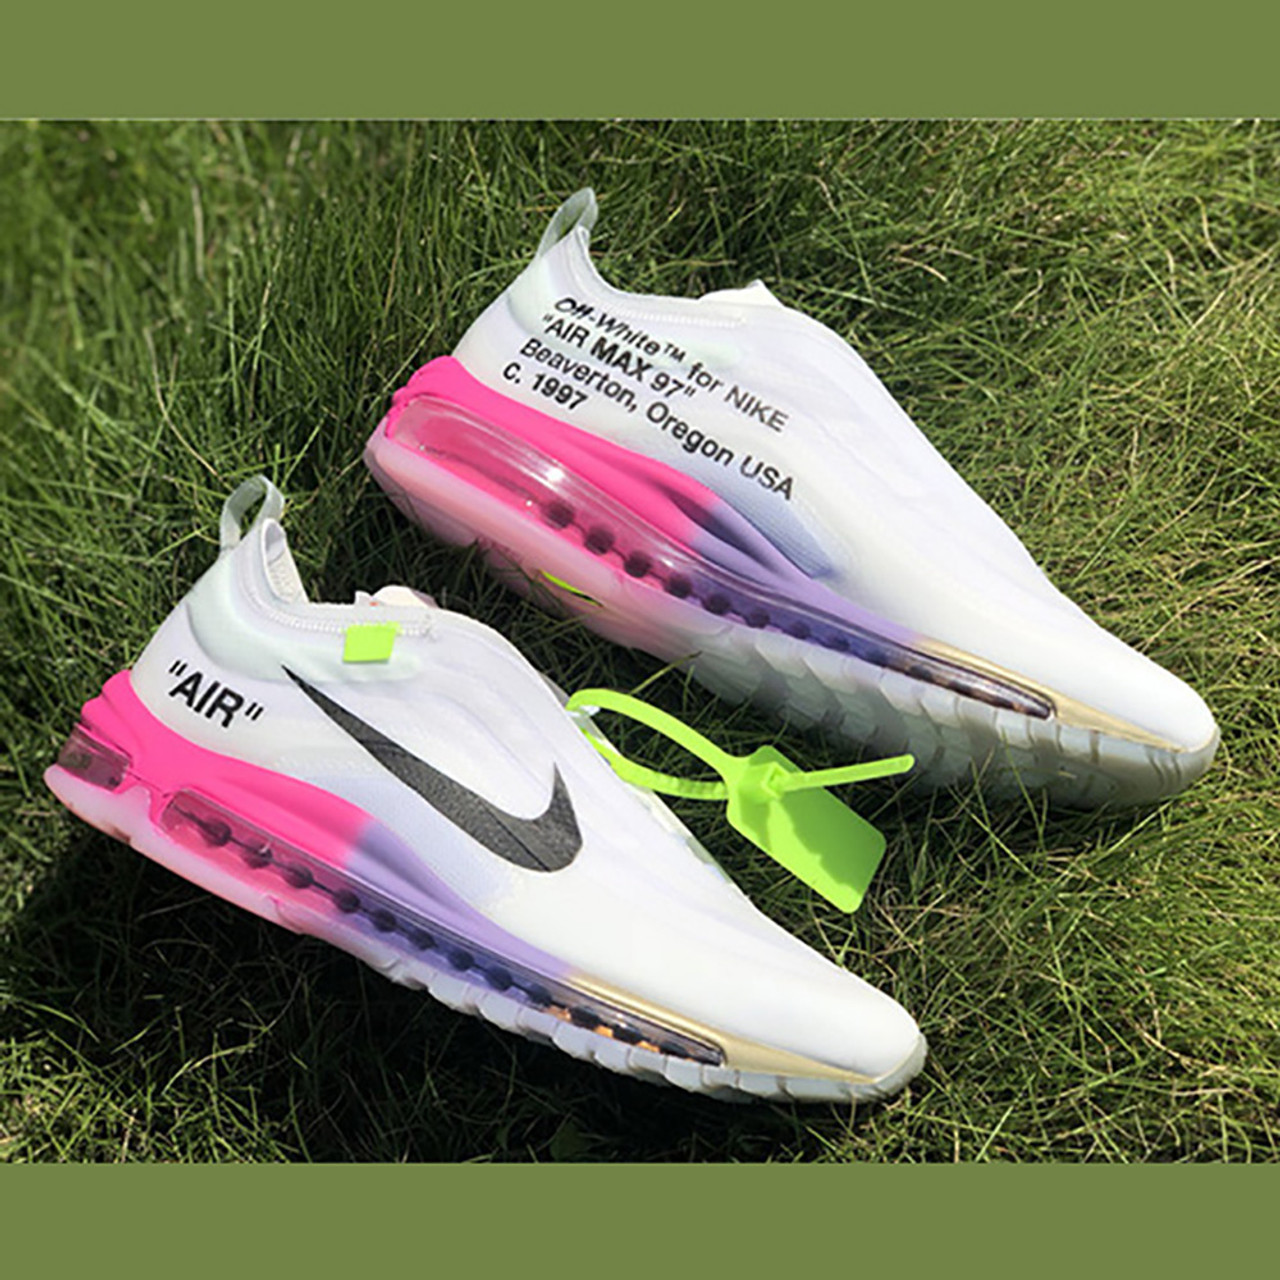 How Do You Like The OFF-WHITE x Nike Air Max 97 Queen? •